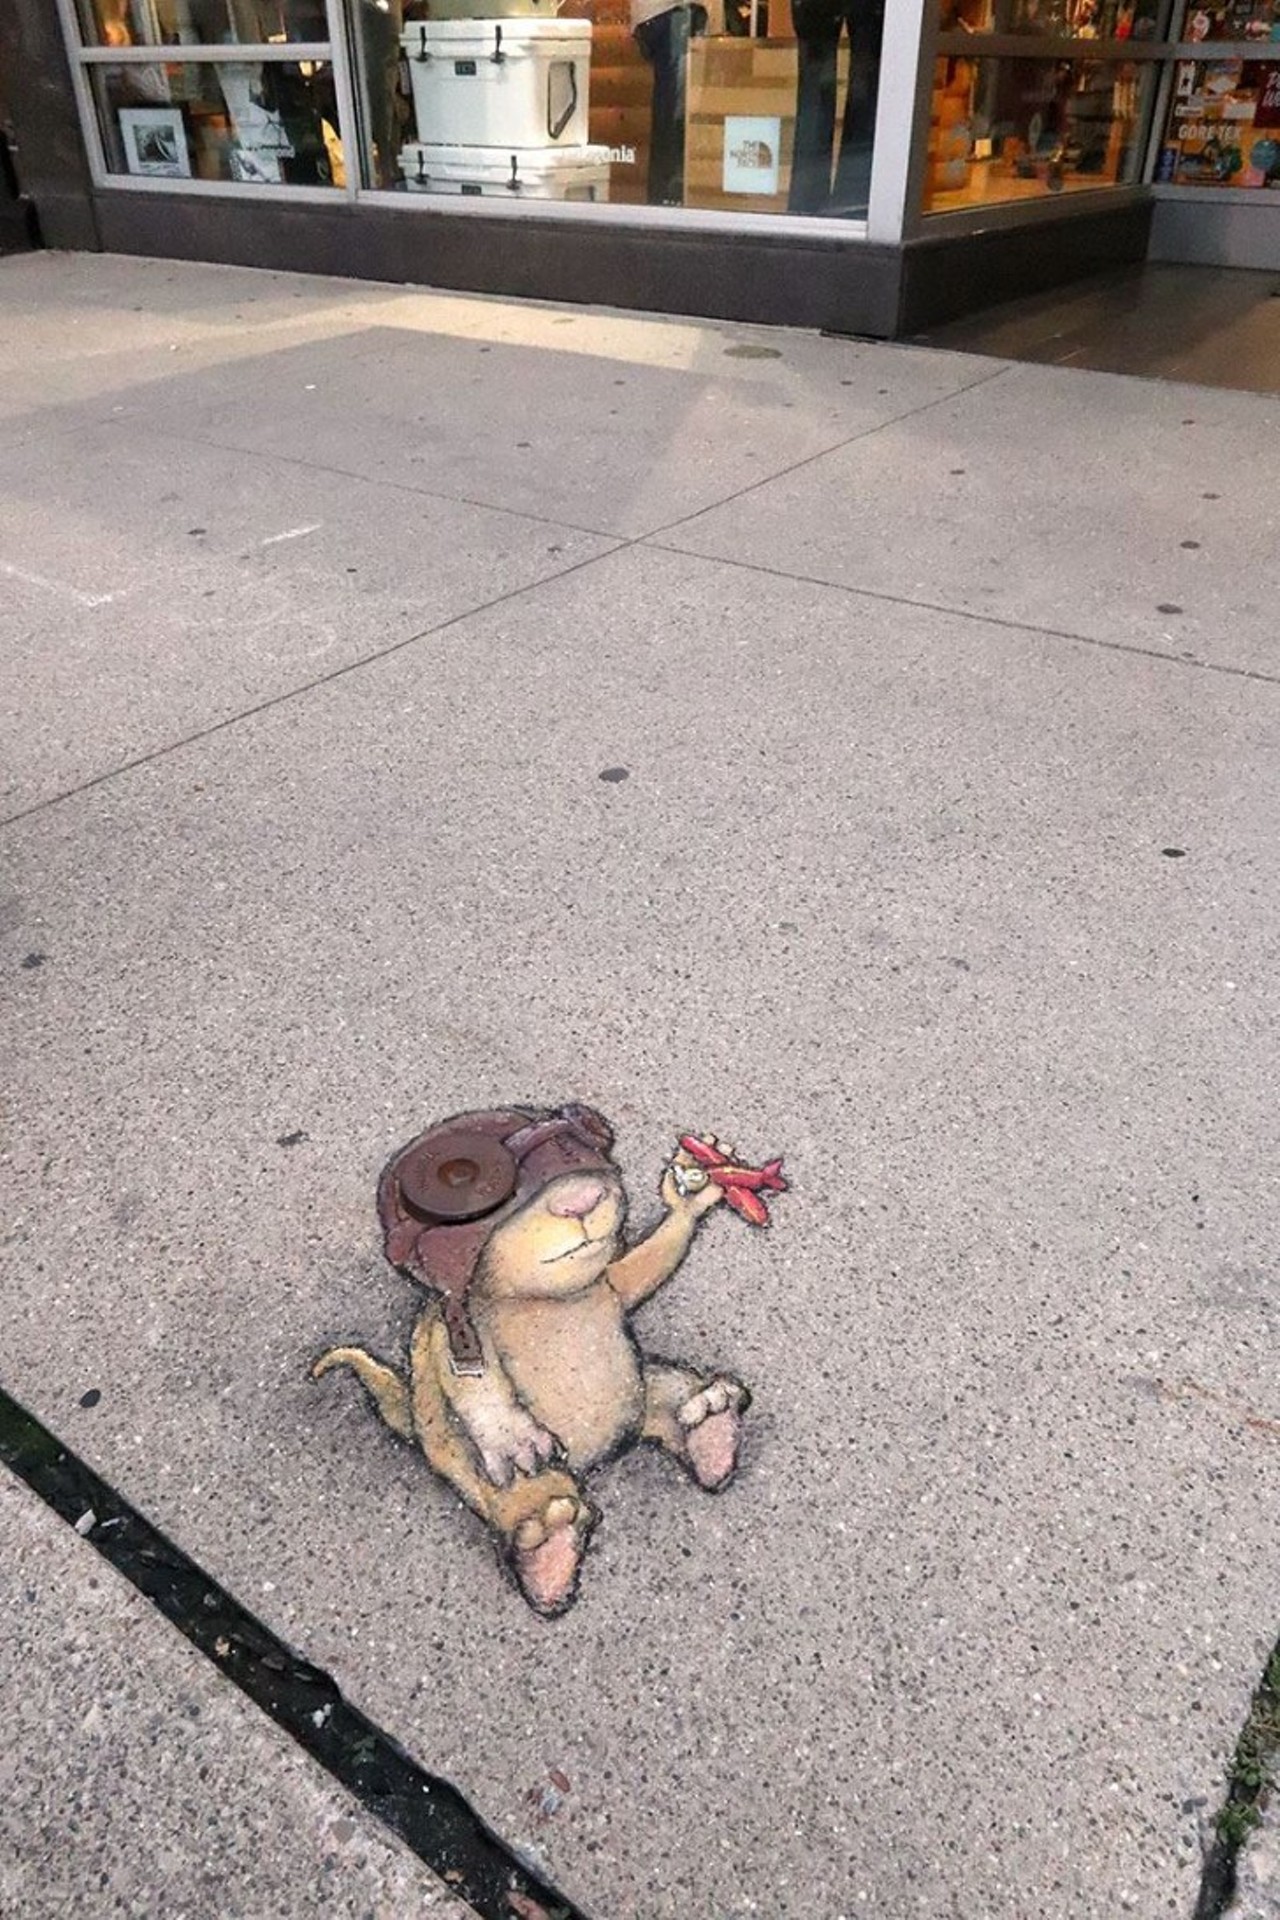 See all of the adorable 3D chalk art made by this Michigan artist